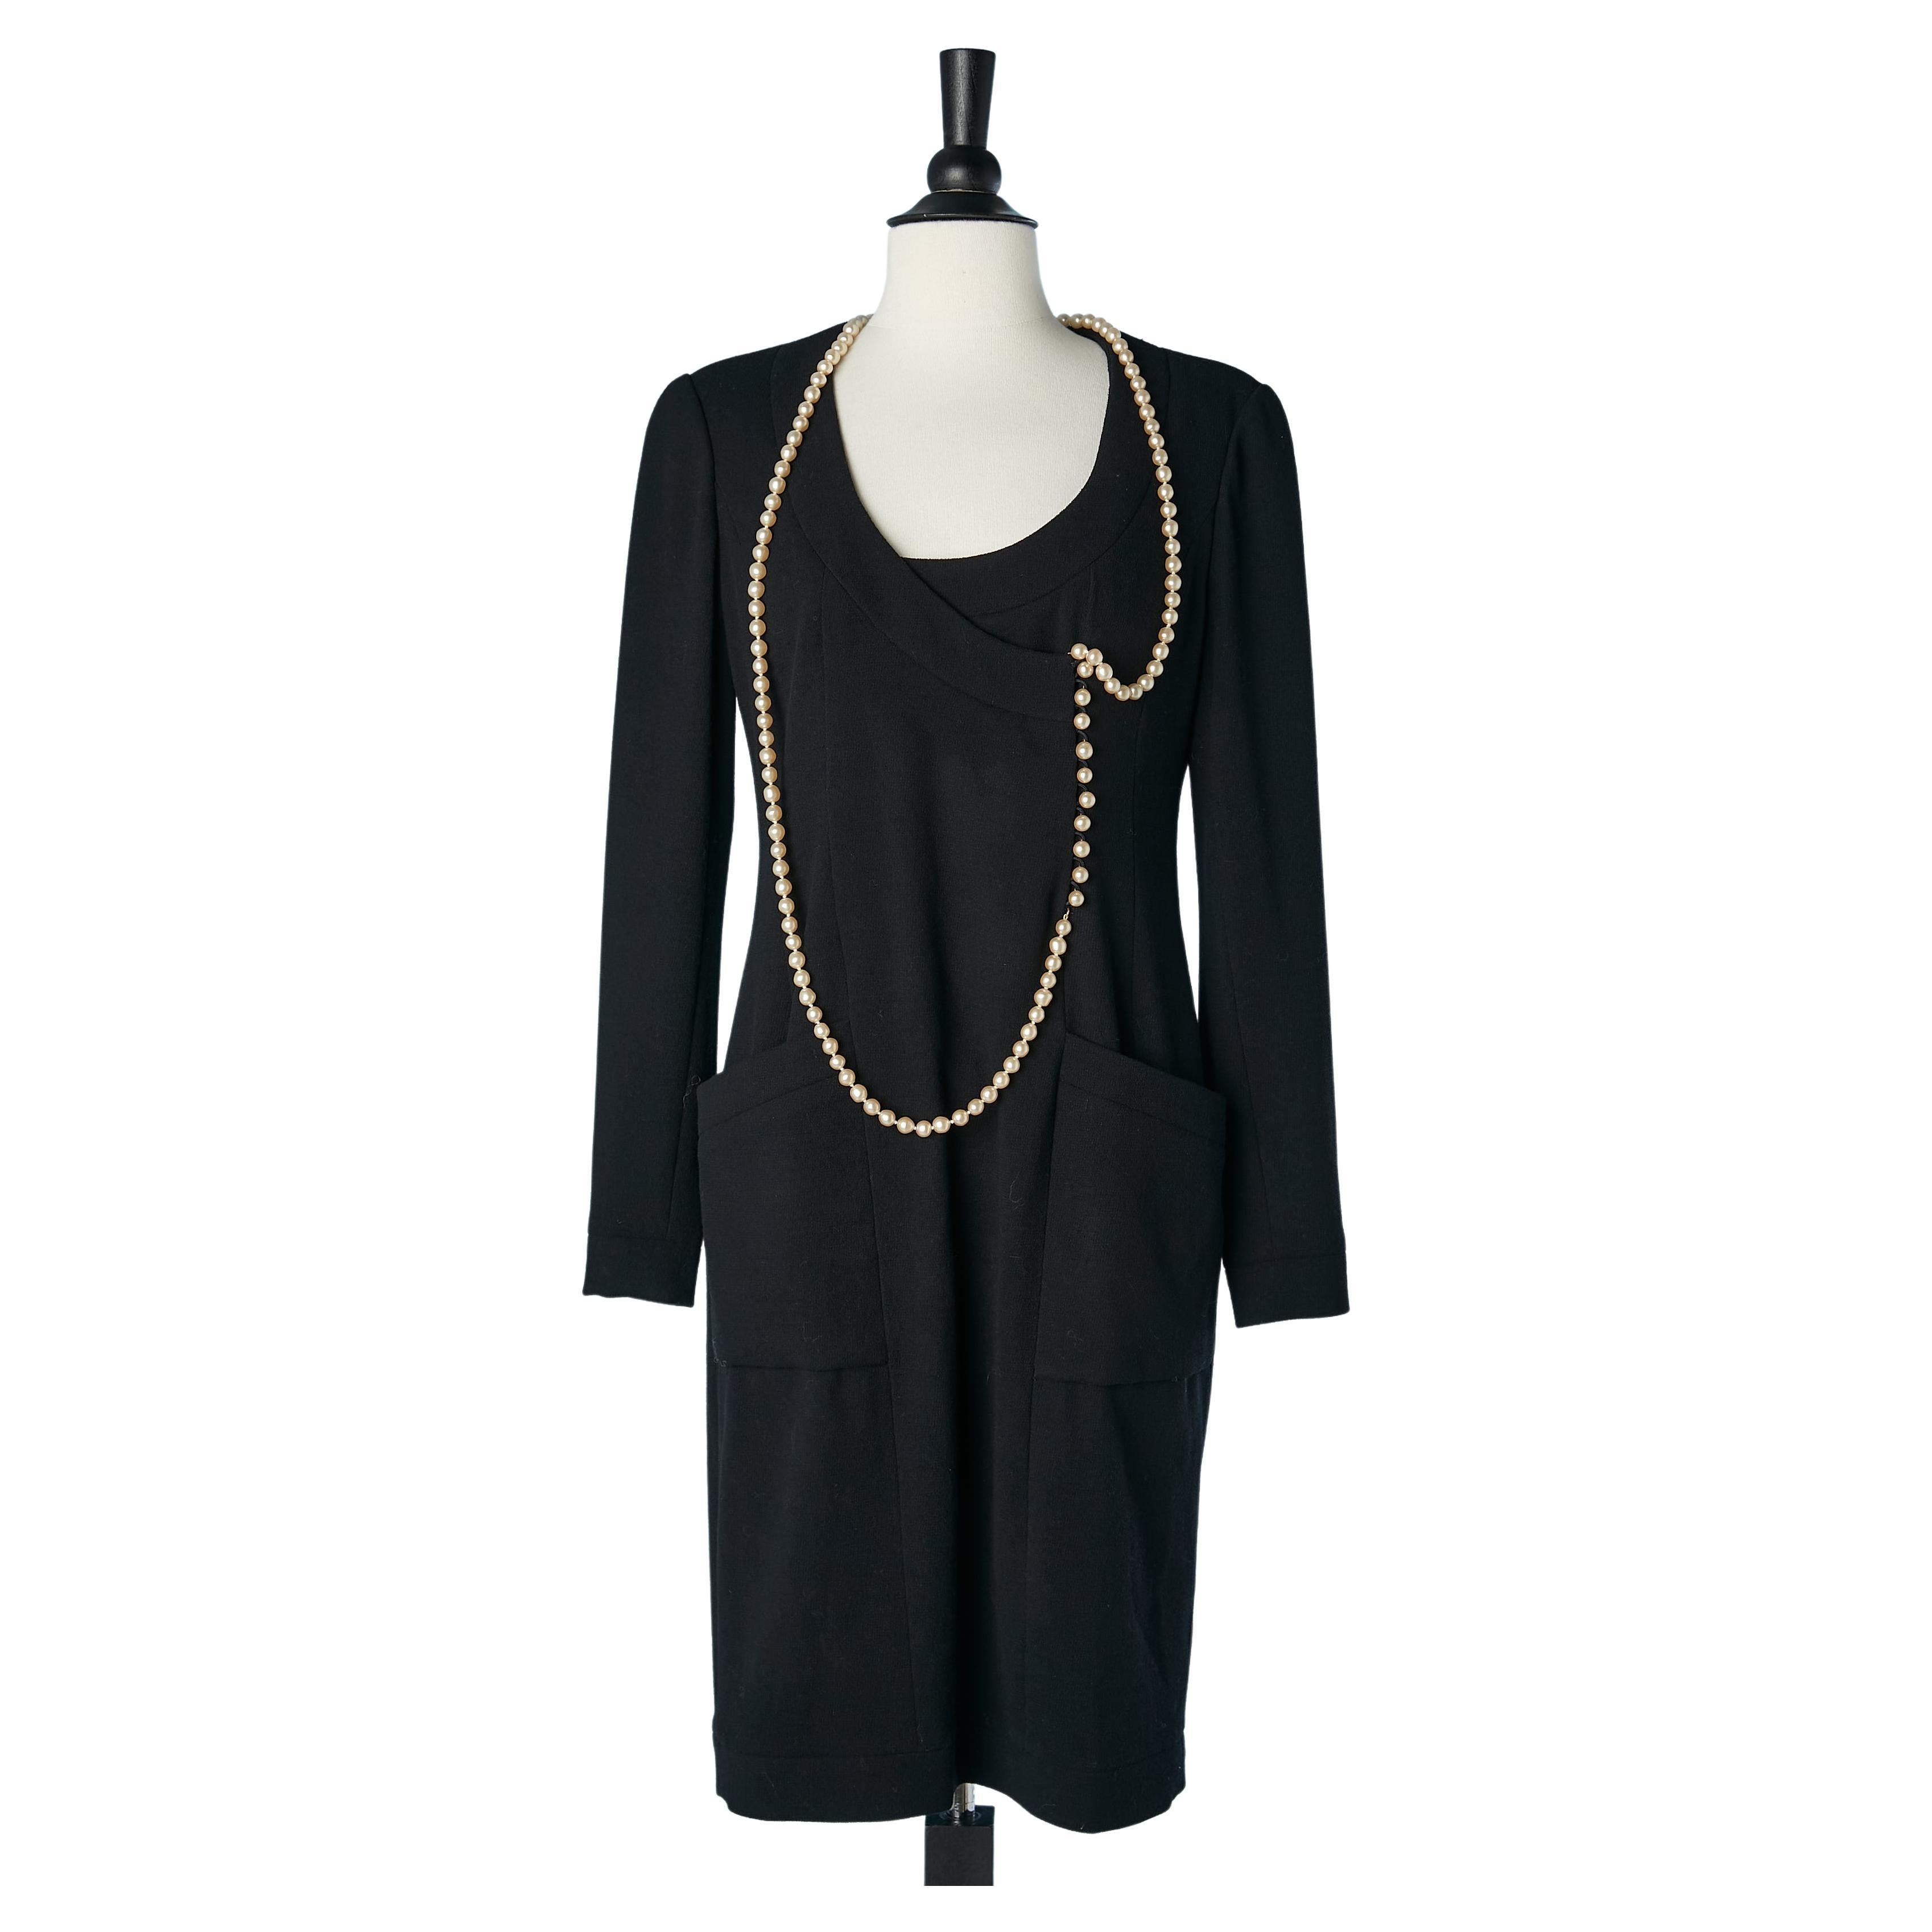 Black wool cocktail dress with pearls long neckless Chanel Boutique  For Sale